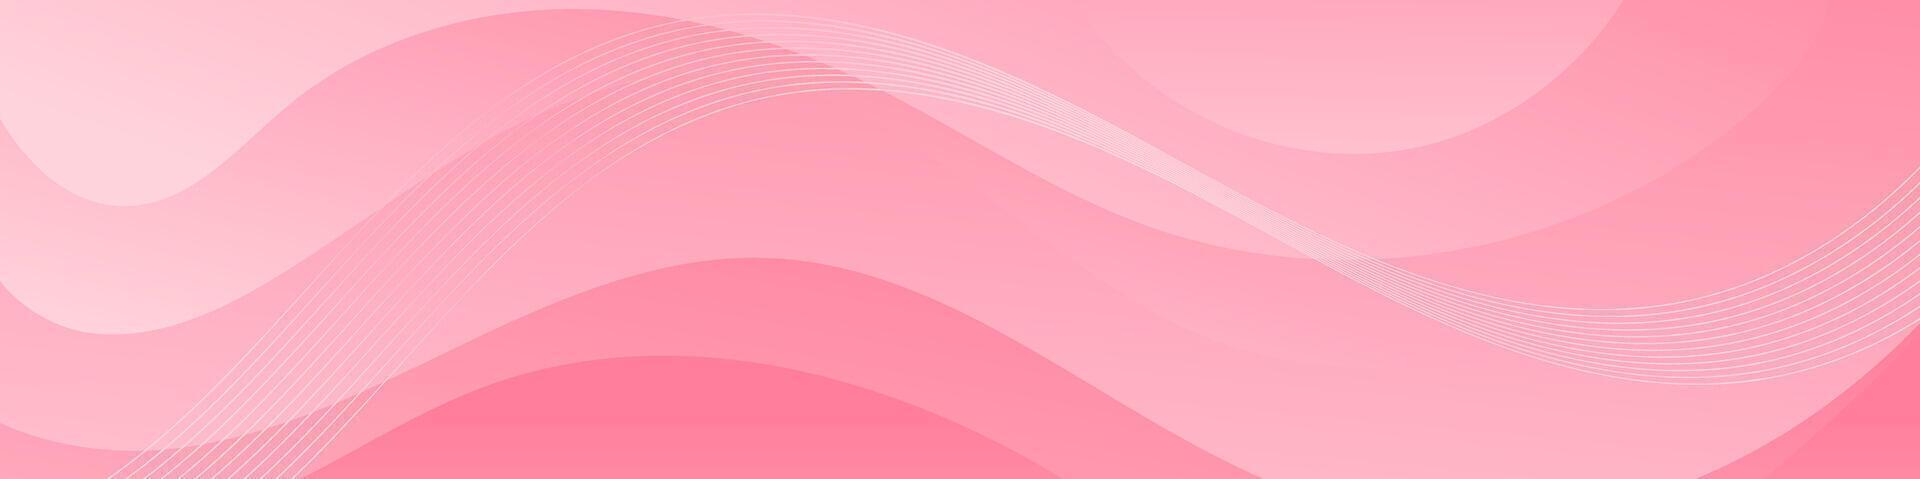 Abstract pink banner color with a unique wavy design. It is ideal for creating eye catching headers, promotional banners, and graphic elements with a modern and dynamic look. vector